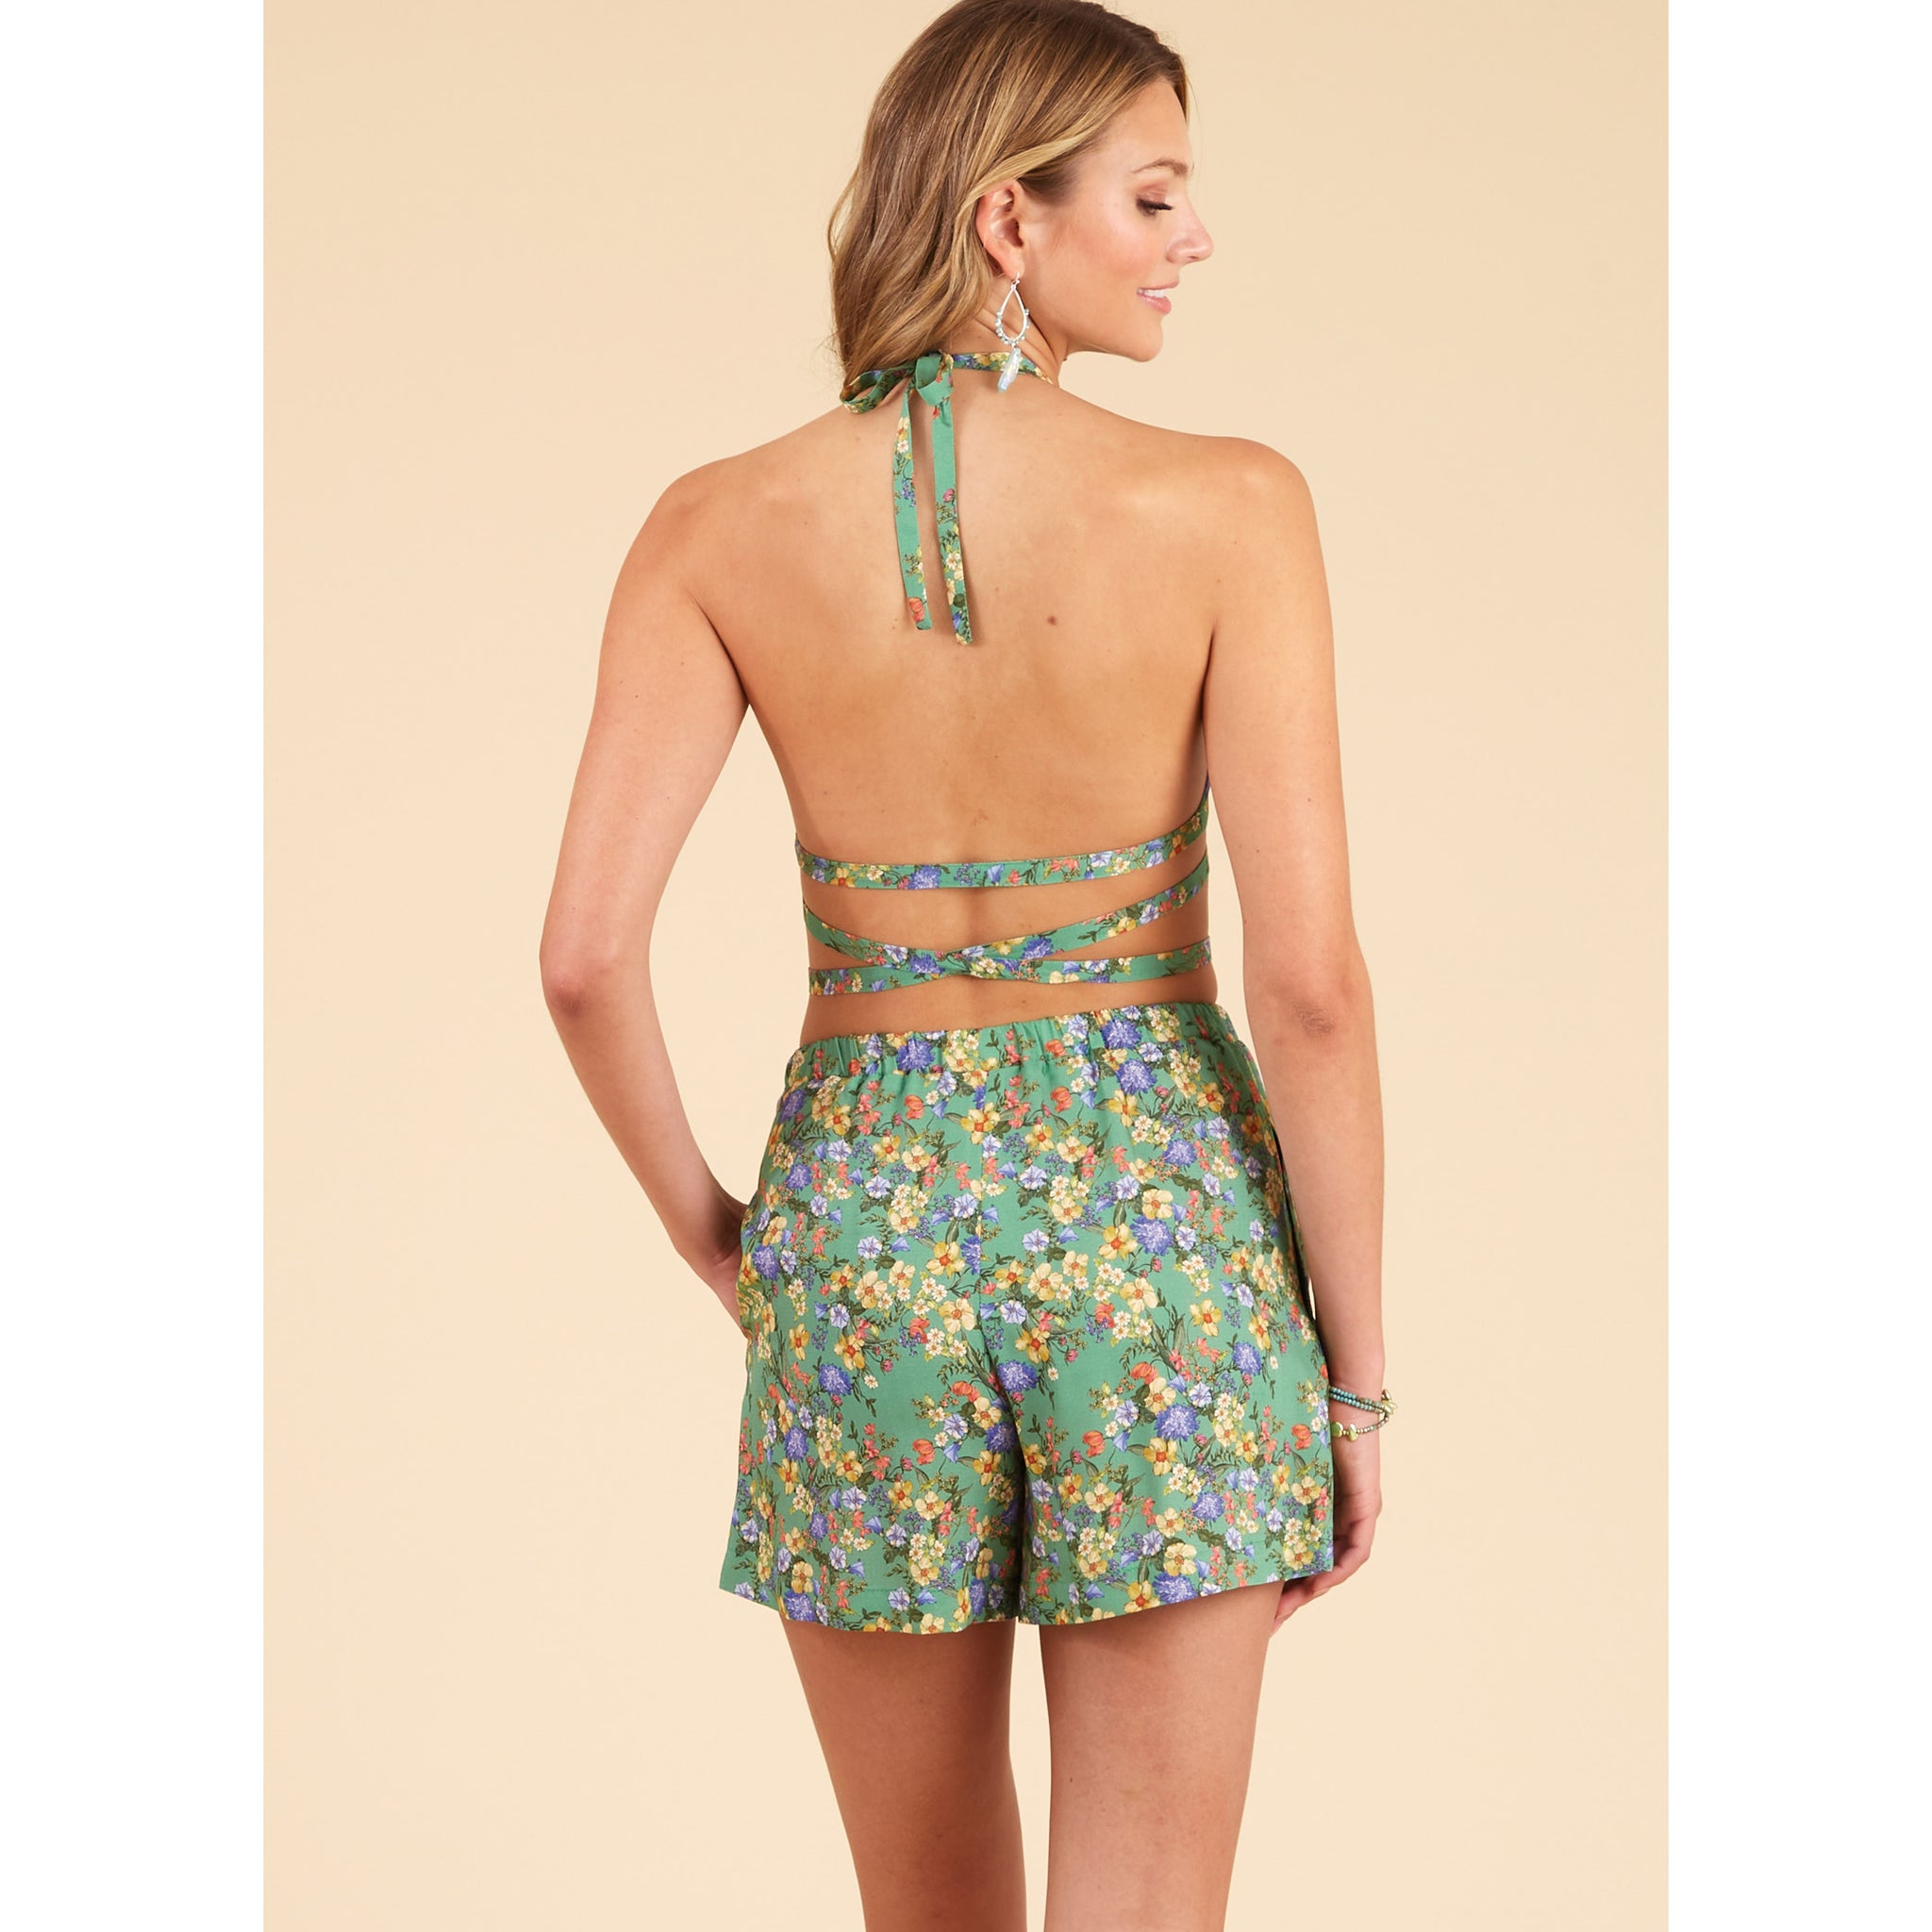 Newlook Pattern 6737 Misses' Jacket, Wrap Halter Top and Shorts – Lincraft  New Zealand